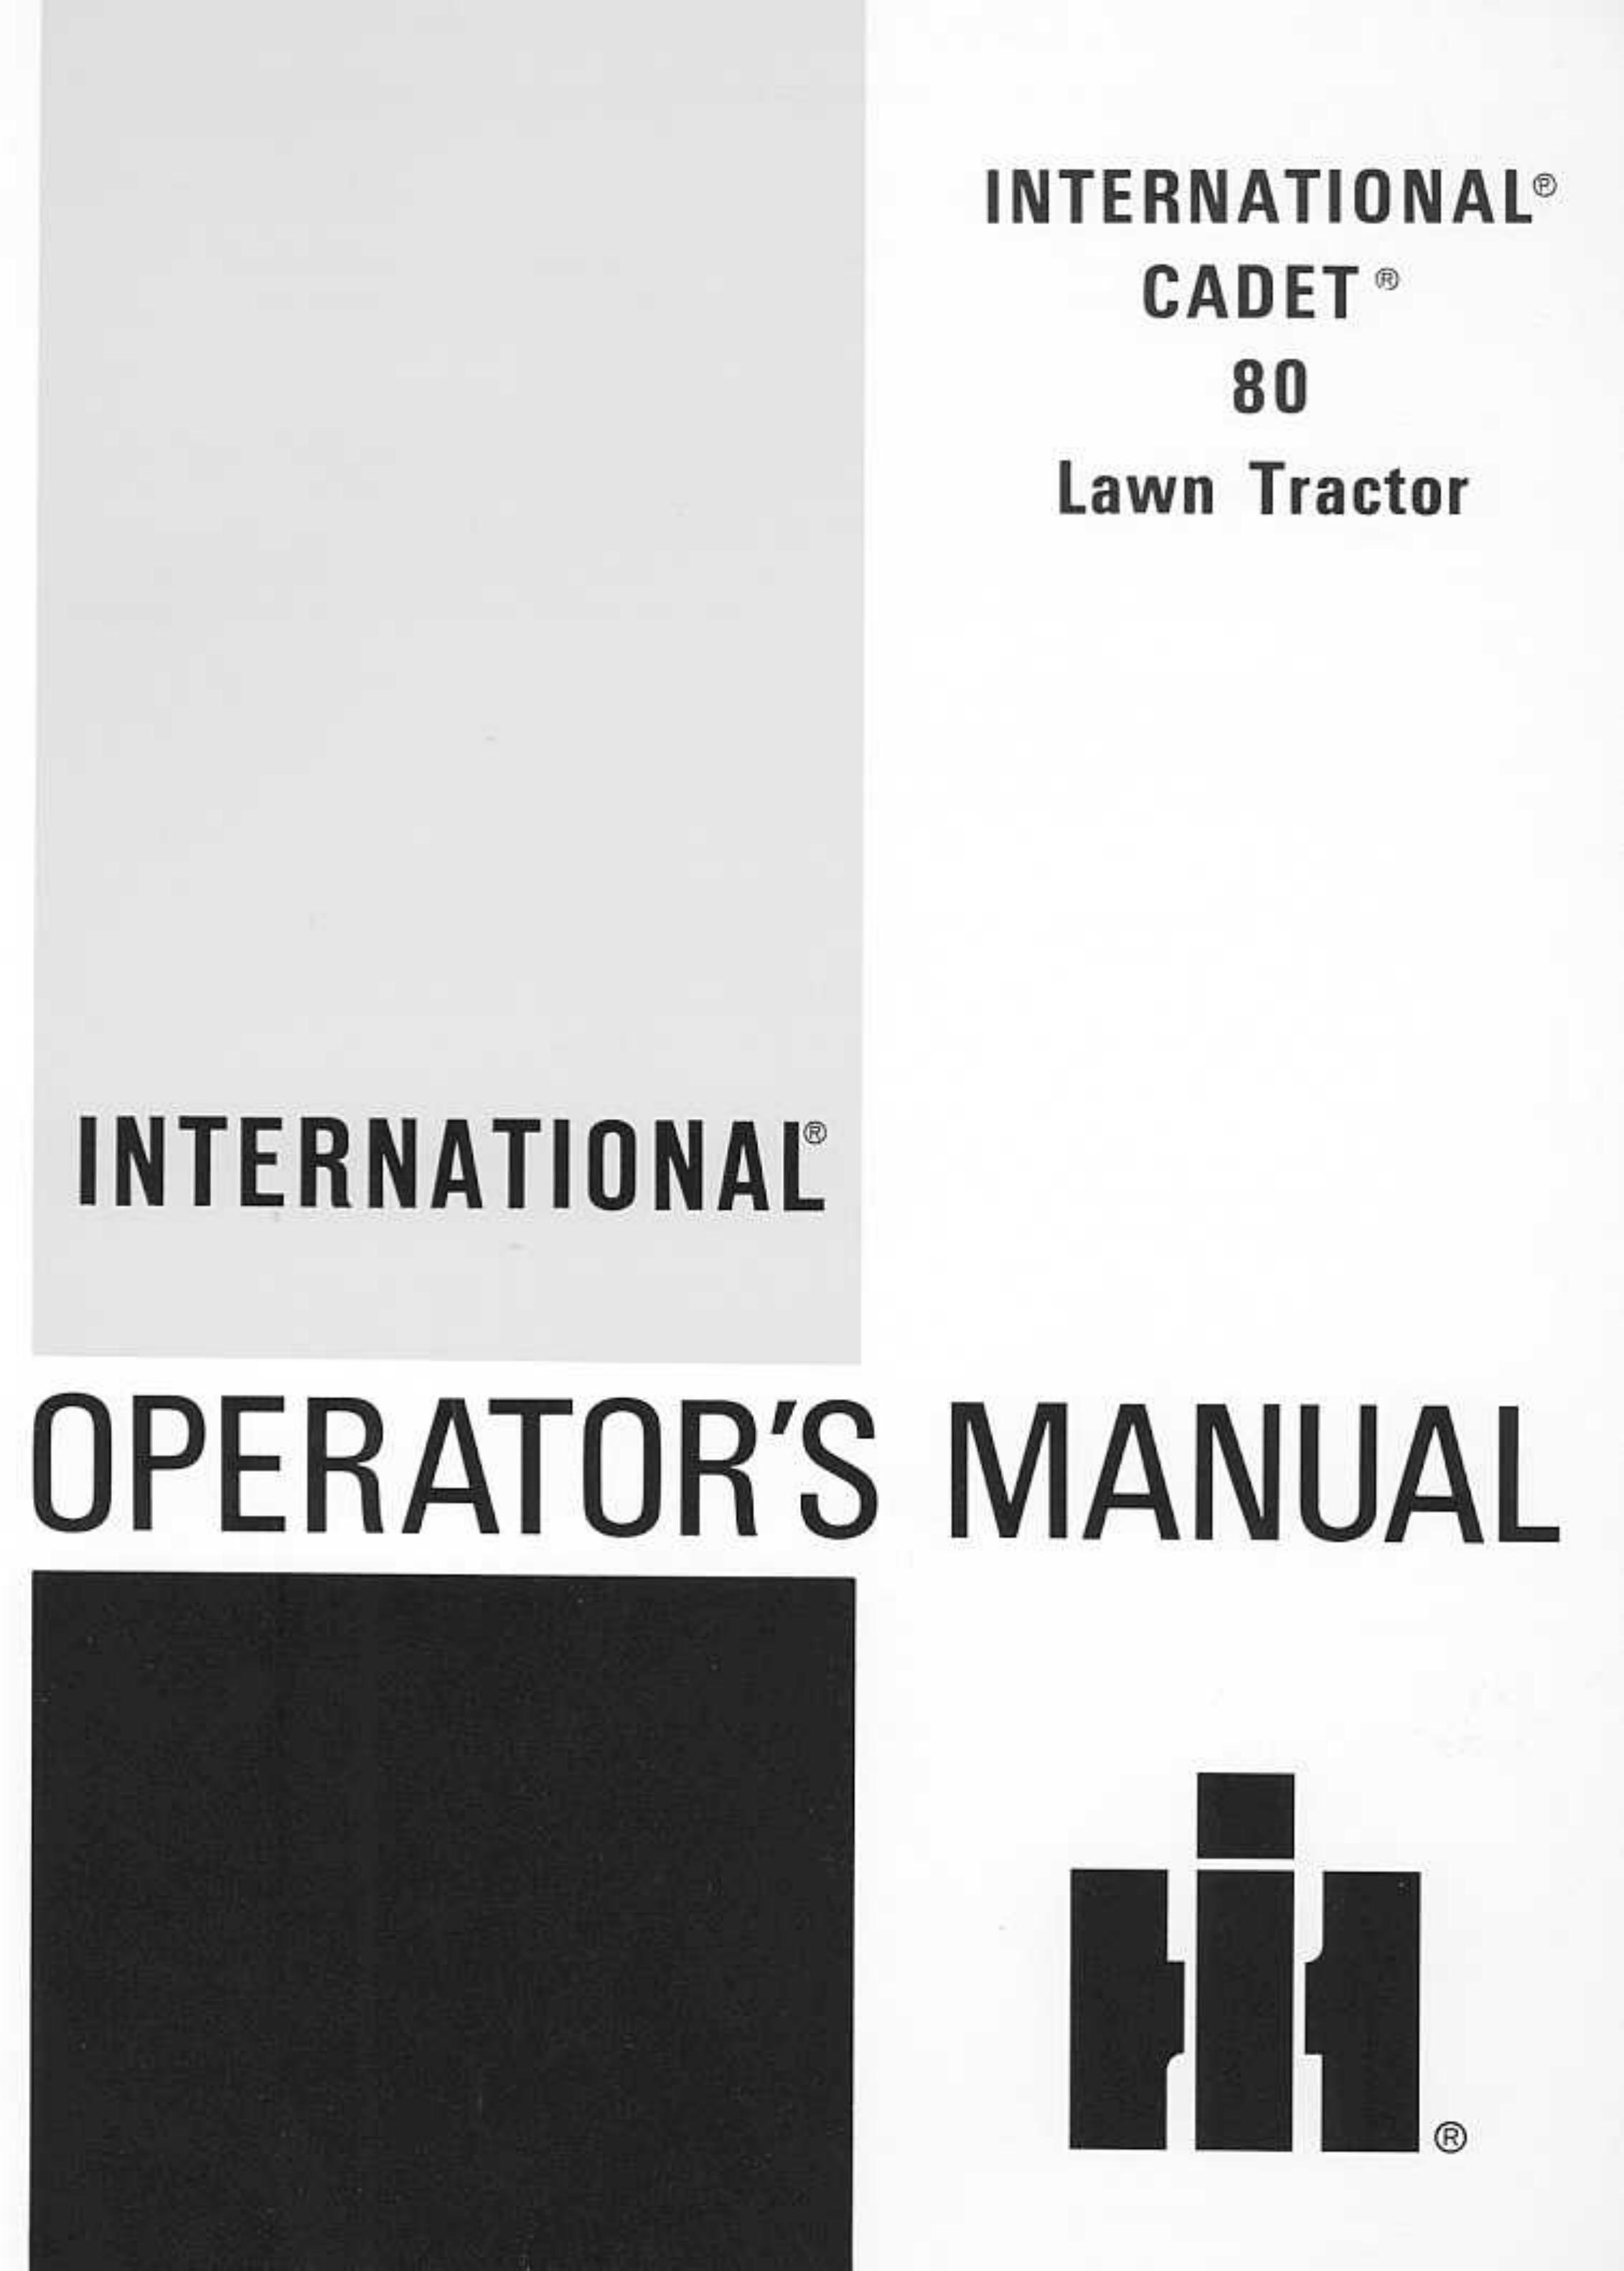 International Home Products Cadet 80 Lawn Mower User Manual